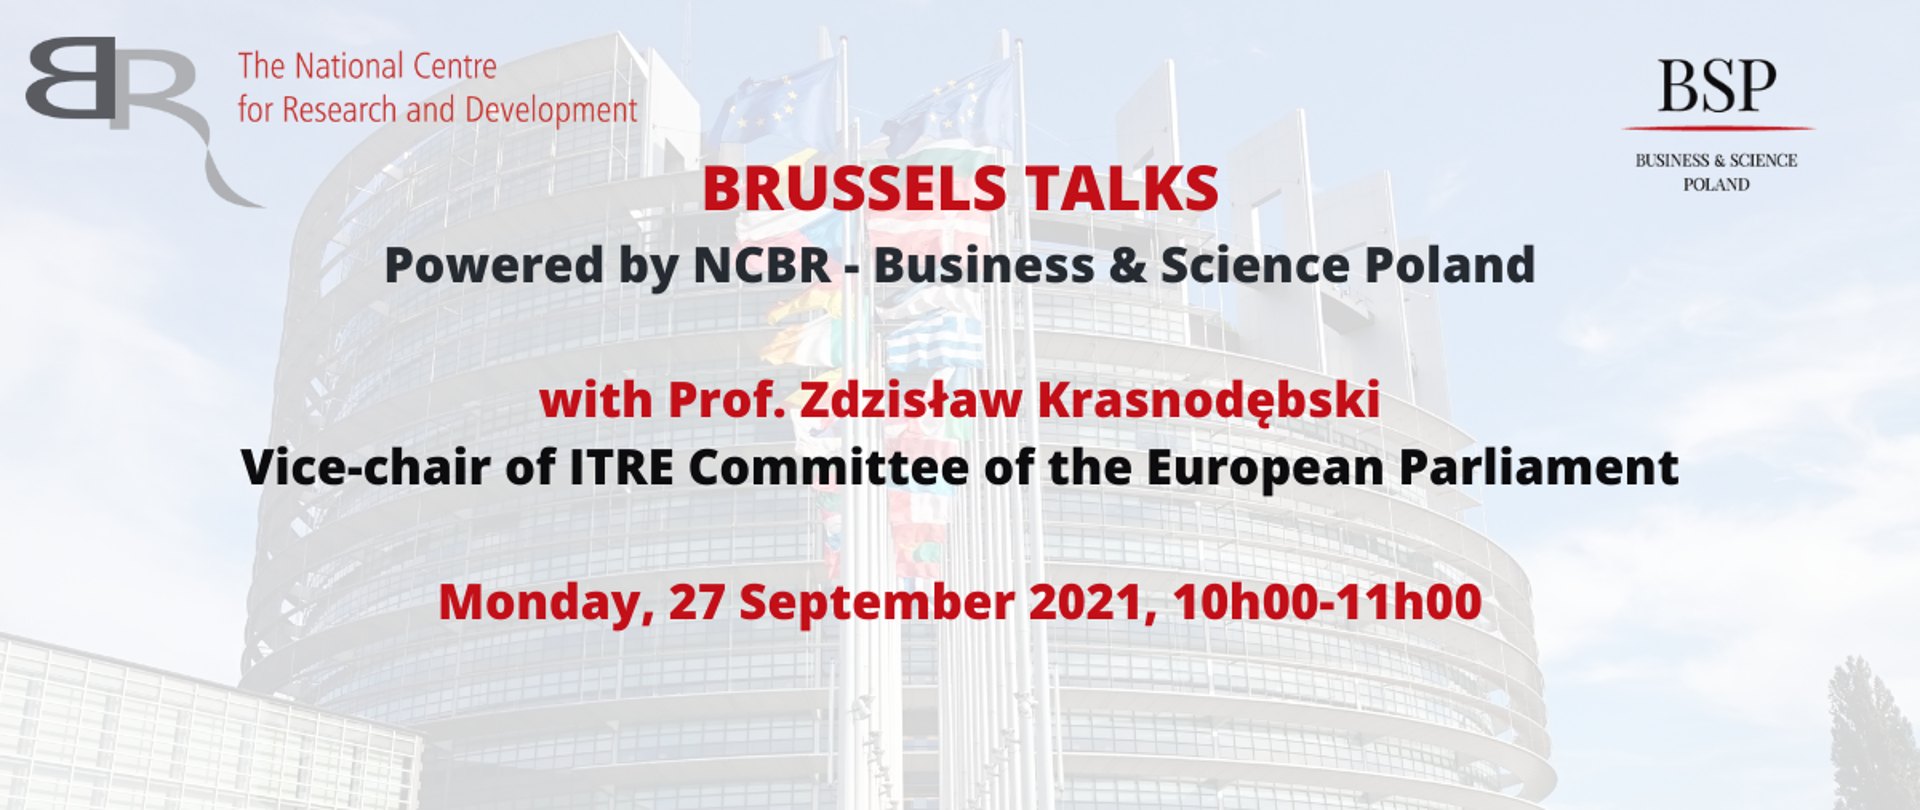 BRUSSELS TALKS Powered by NCBR - Business & Science Poland